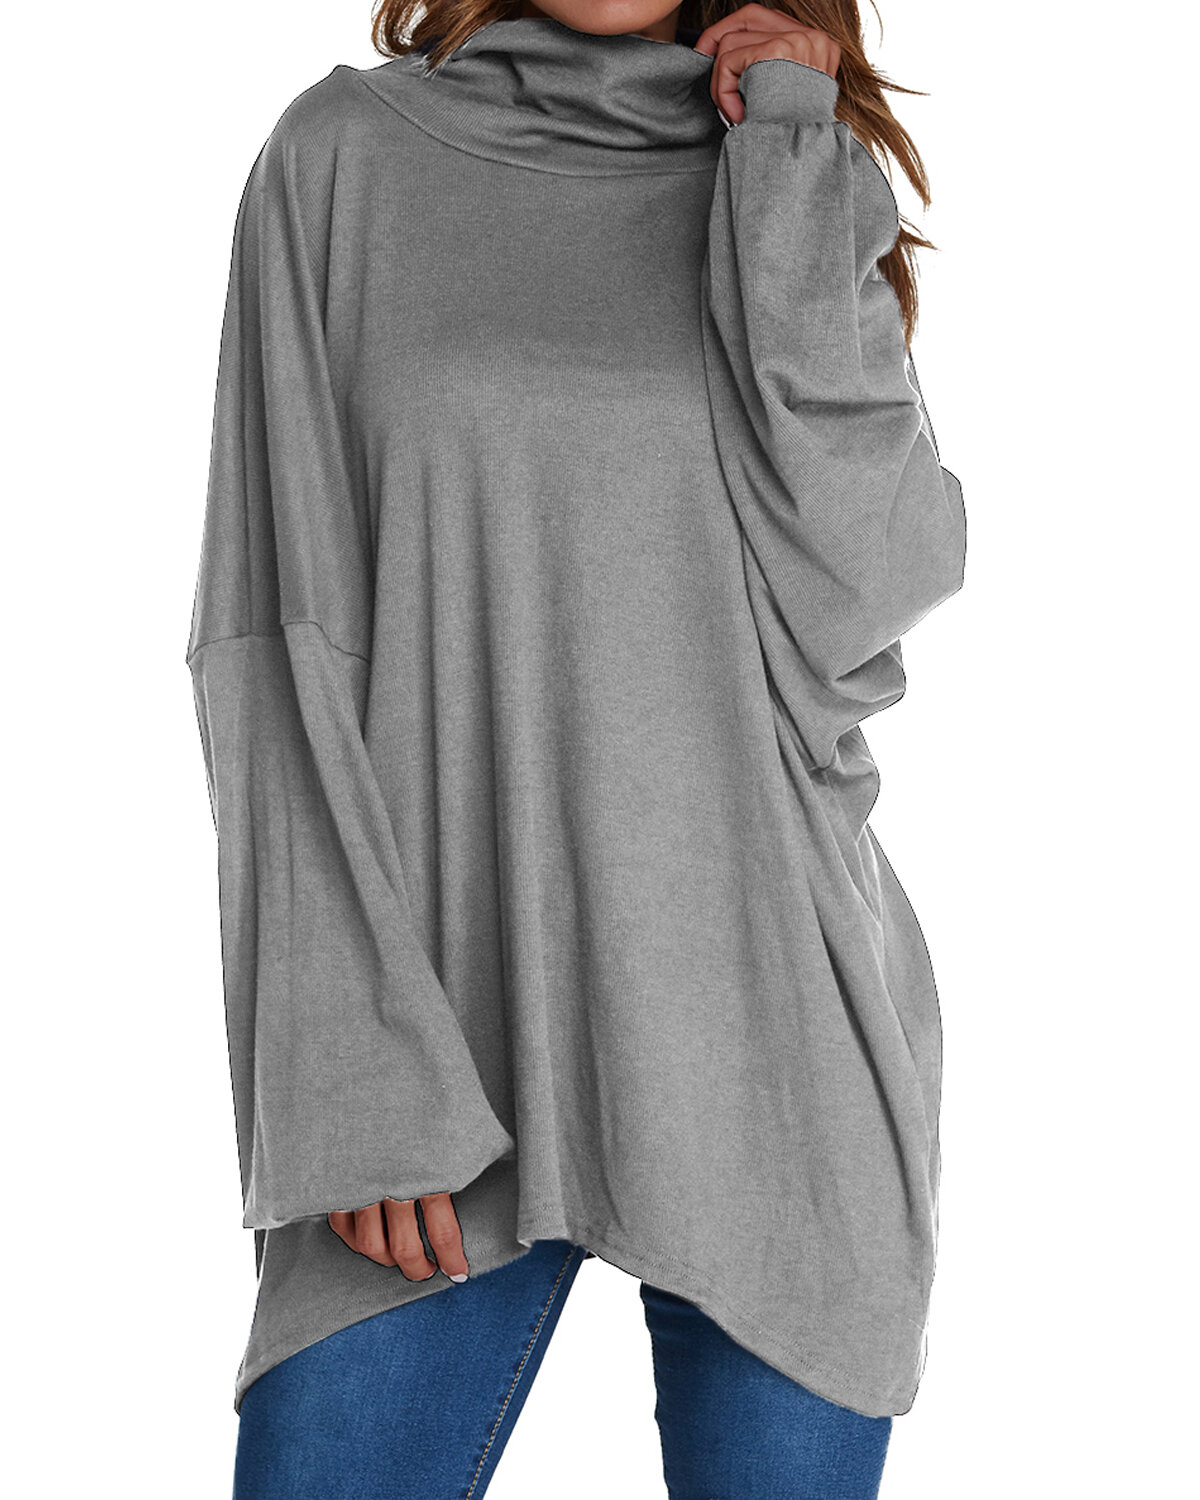 Women Long Sleeve Loose Pullover Tops Pure Color Turtleneck Blouse